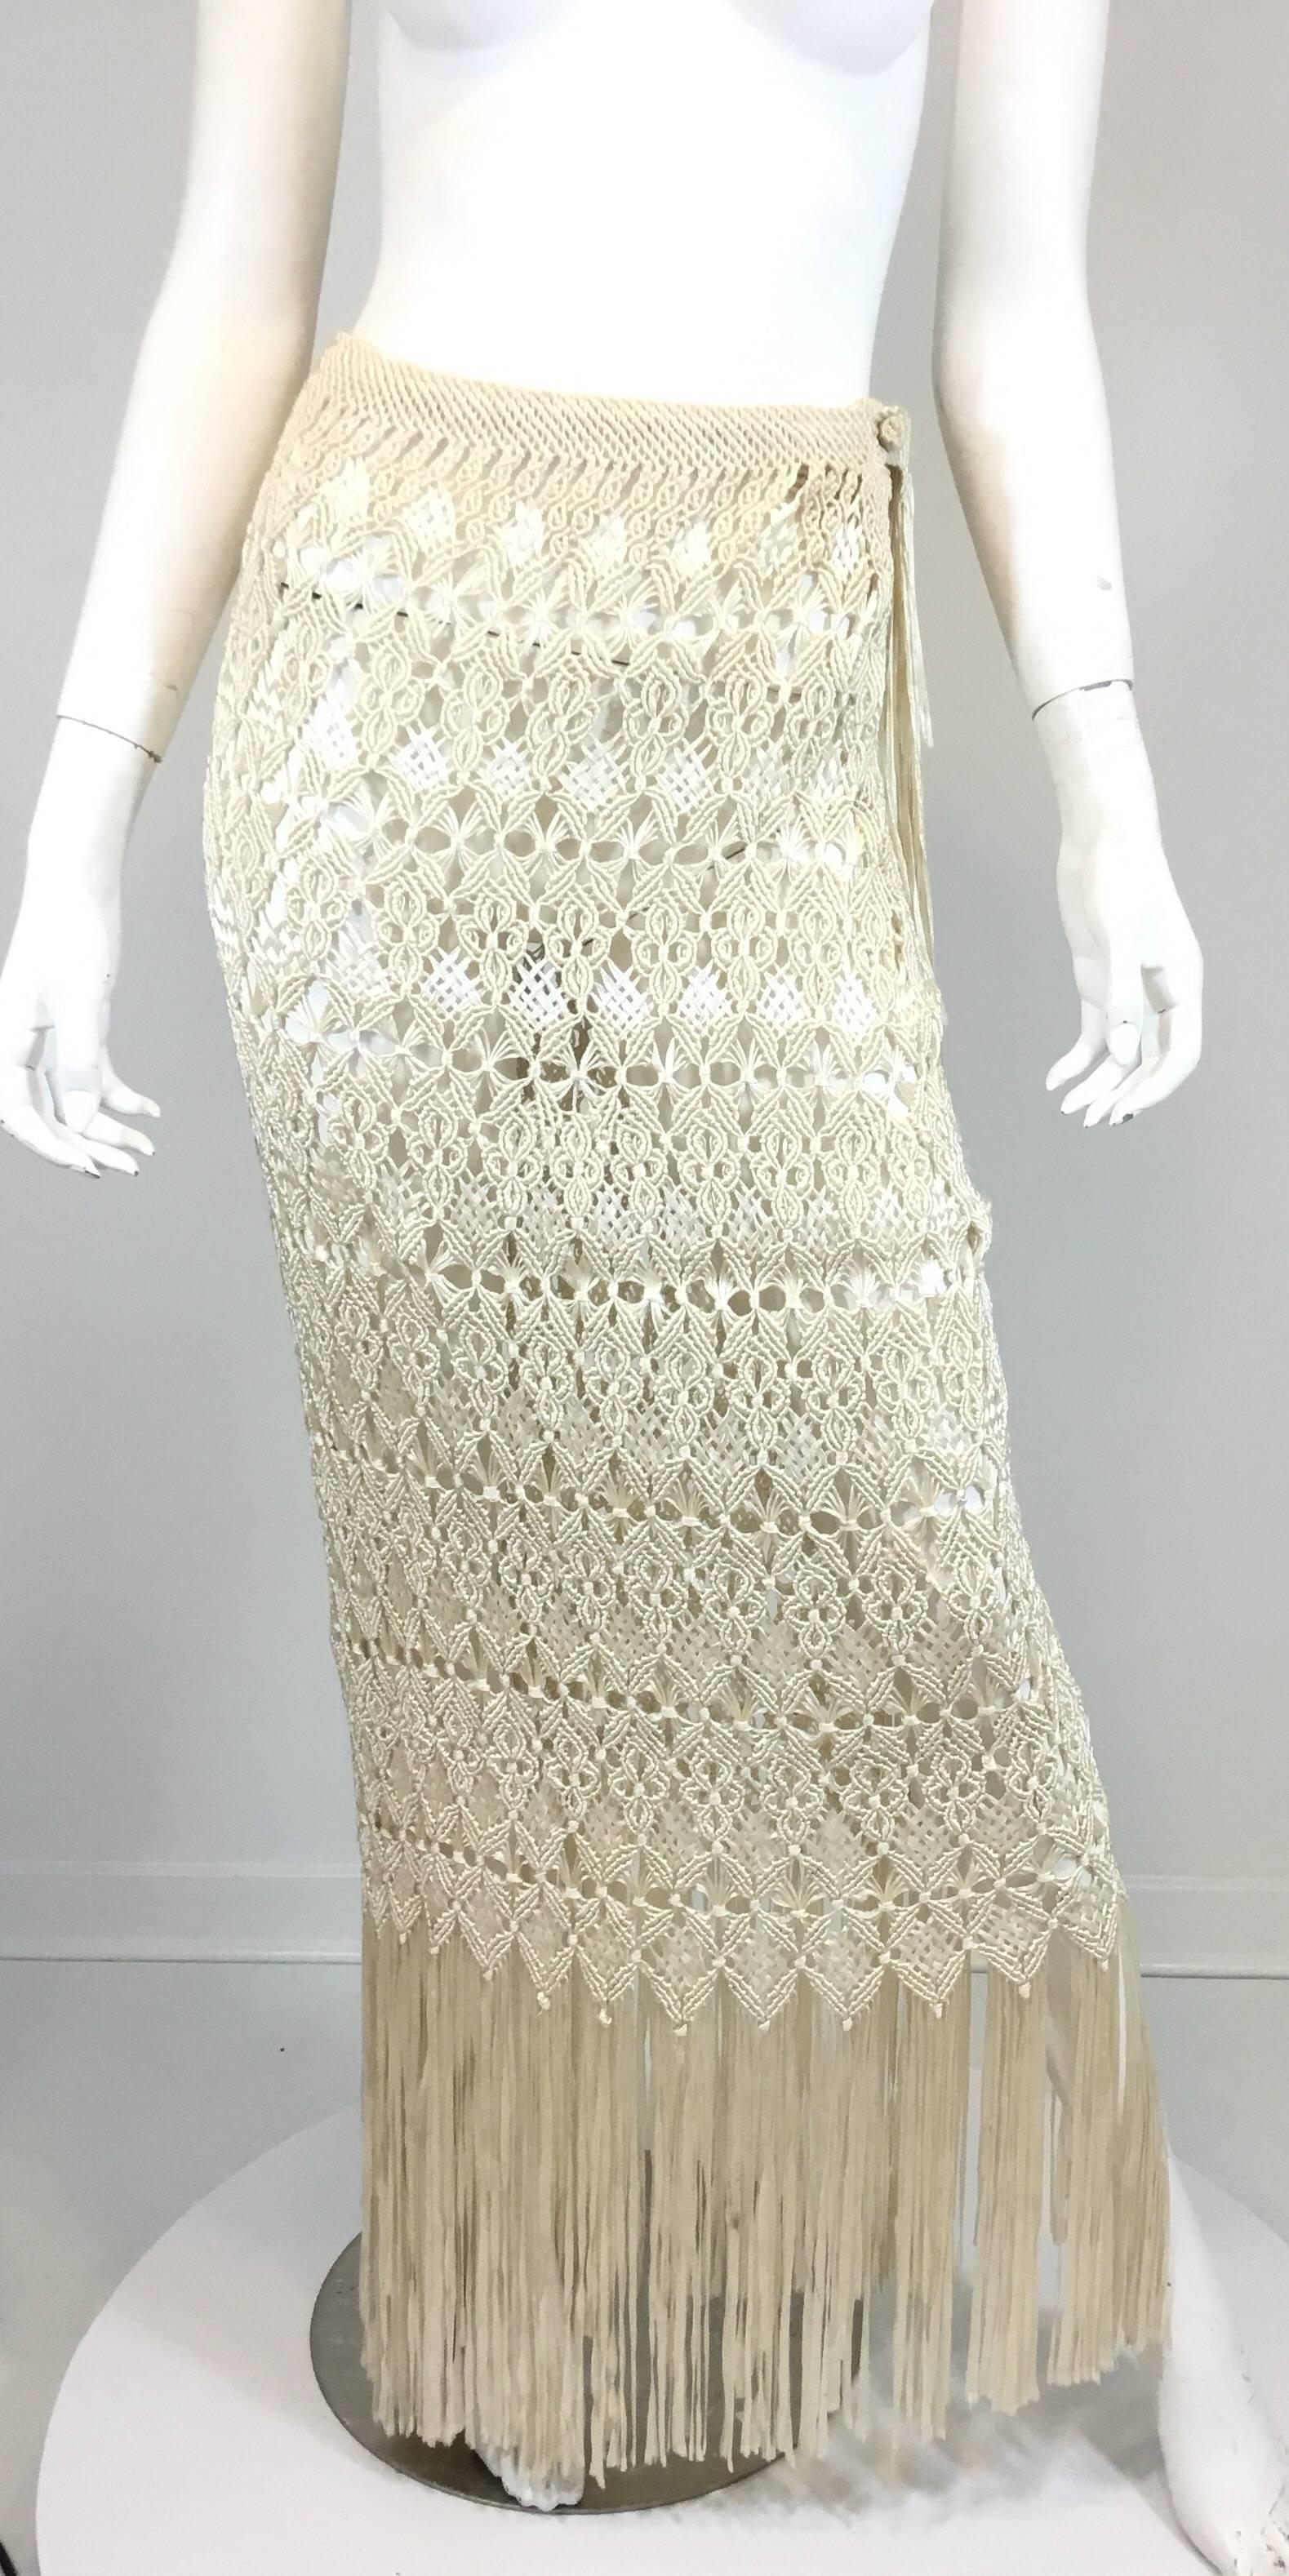 Wayu handmade crochet shawl and skirt set in ivory/cream. Skirt has a knot button and loop closure along the left side. 

SHAWL:
length 53''

SKIRT: (model is a size 4-6)
waist 25'' + stretch
hips 27'' + Bias Stretch
length 44'' will get shorter as